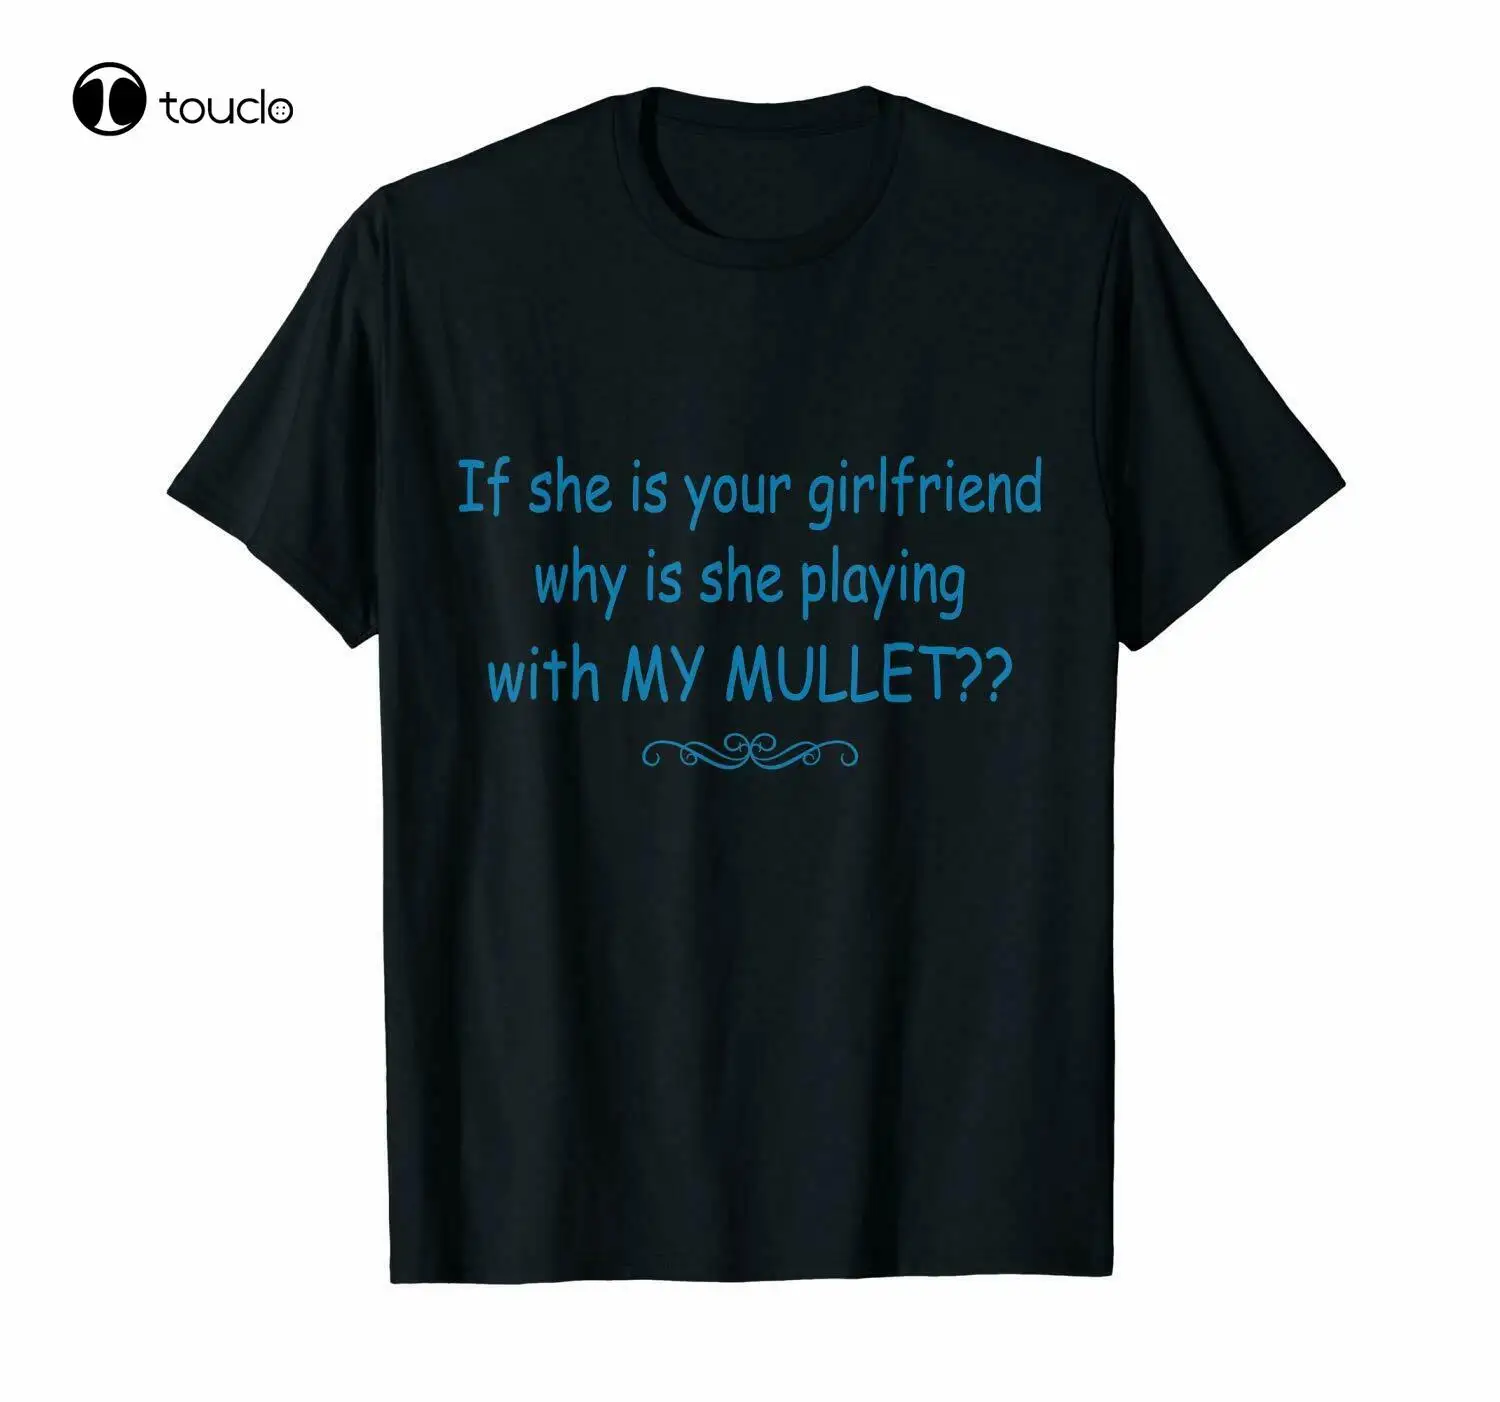 

New If She Is Your Girlfriend Why Is She Playing With My Mullet Funny Black T-Shirt Cotton Tee Shirt